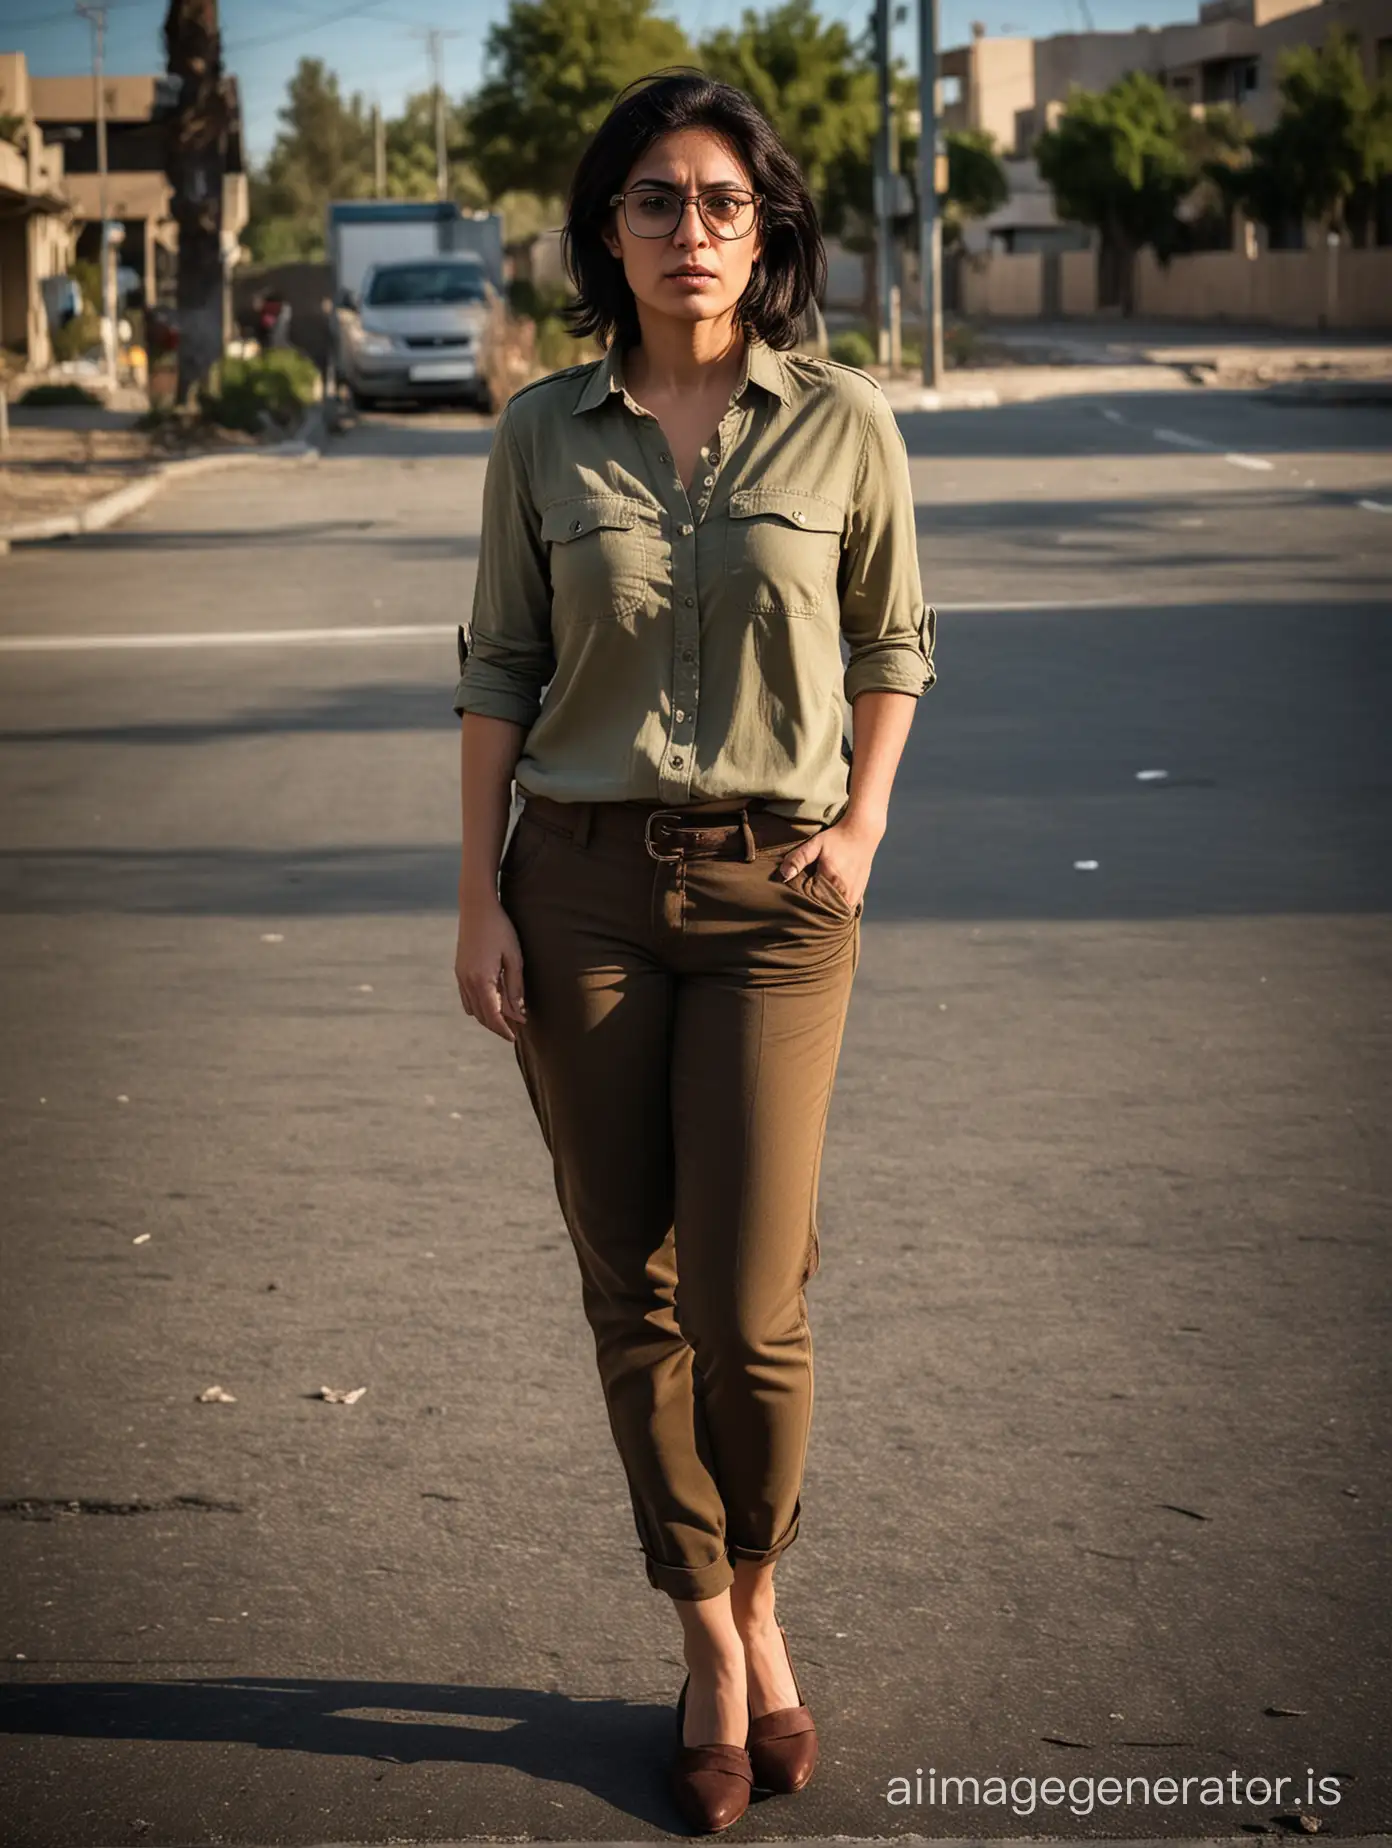 iranian sad woman 40  years old, brown pants, brown shoes ,olive shirt, glasses, black hair, full body shot, in a parking, dramatic lighting